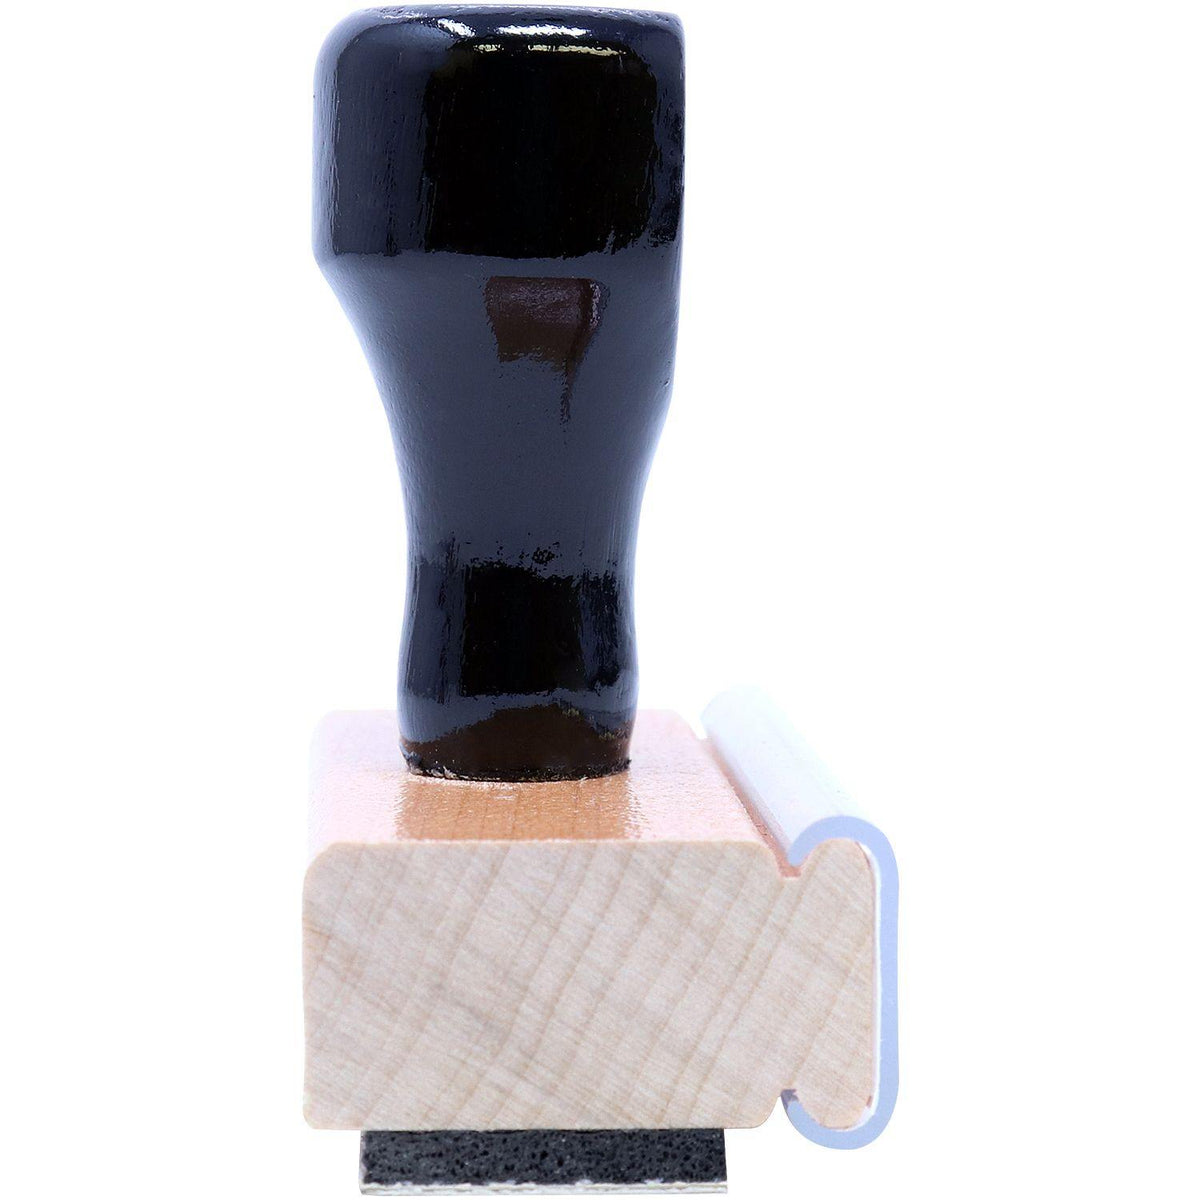 Side View of Large Forgery Rubber Stamp